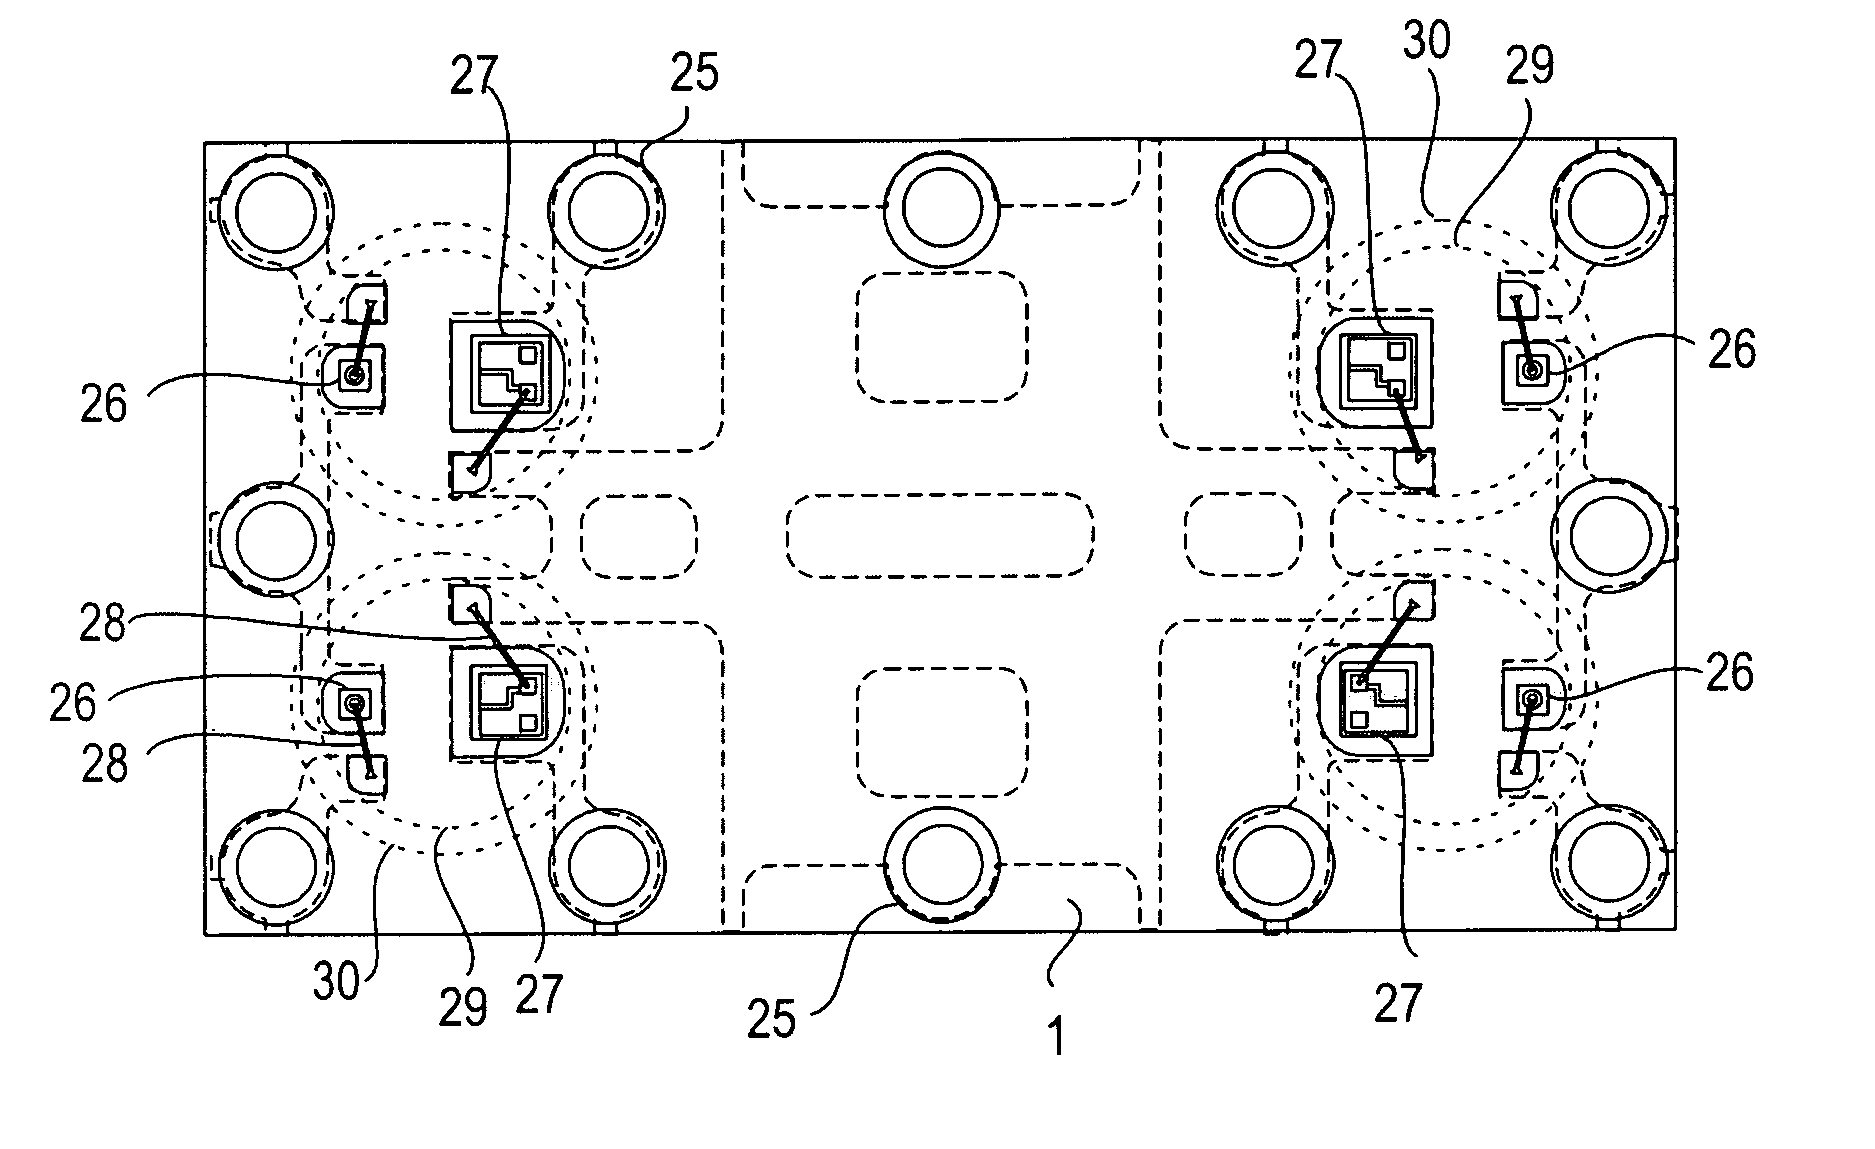 Surface mount multi-channel optocoupler